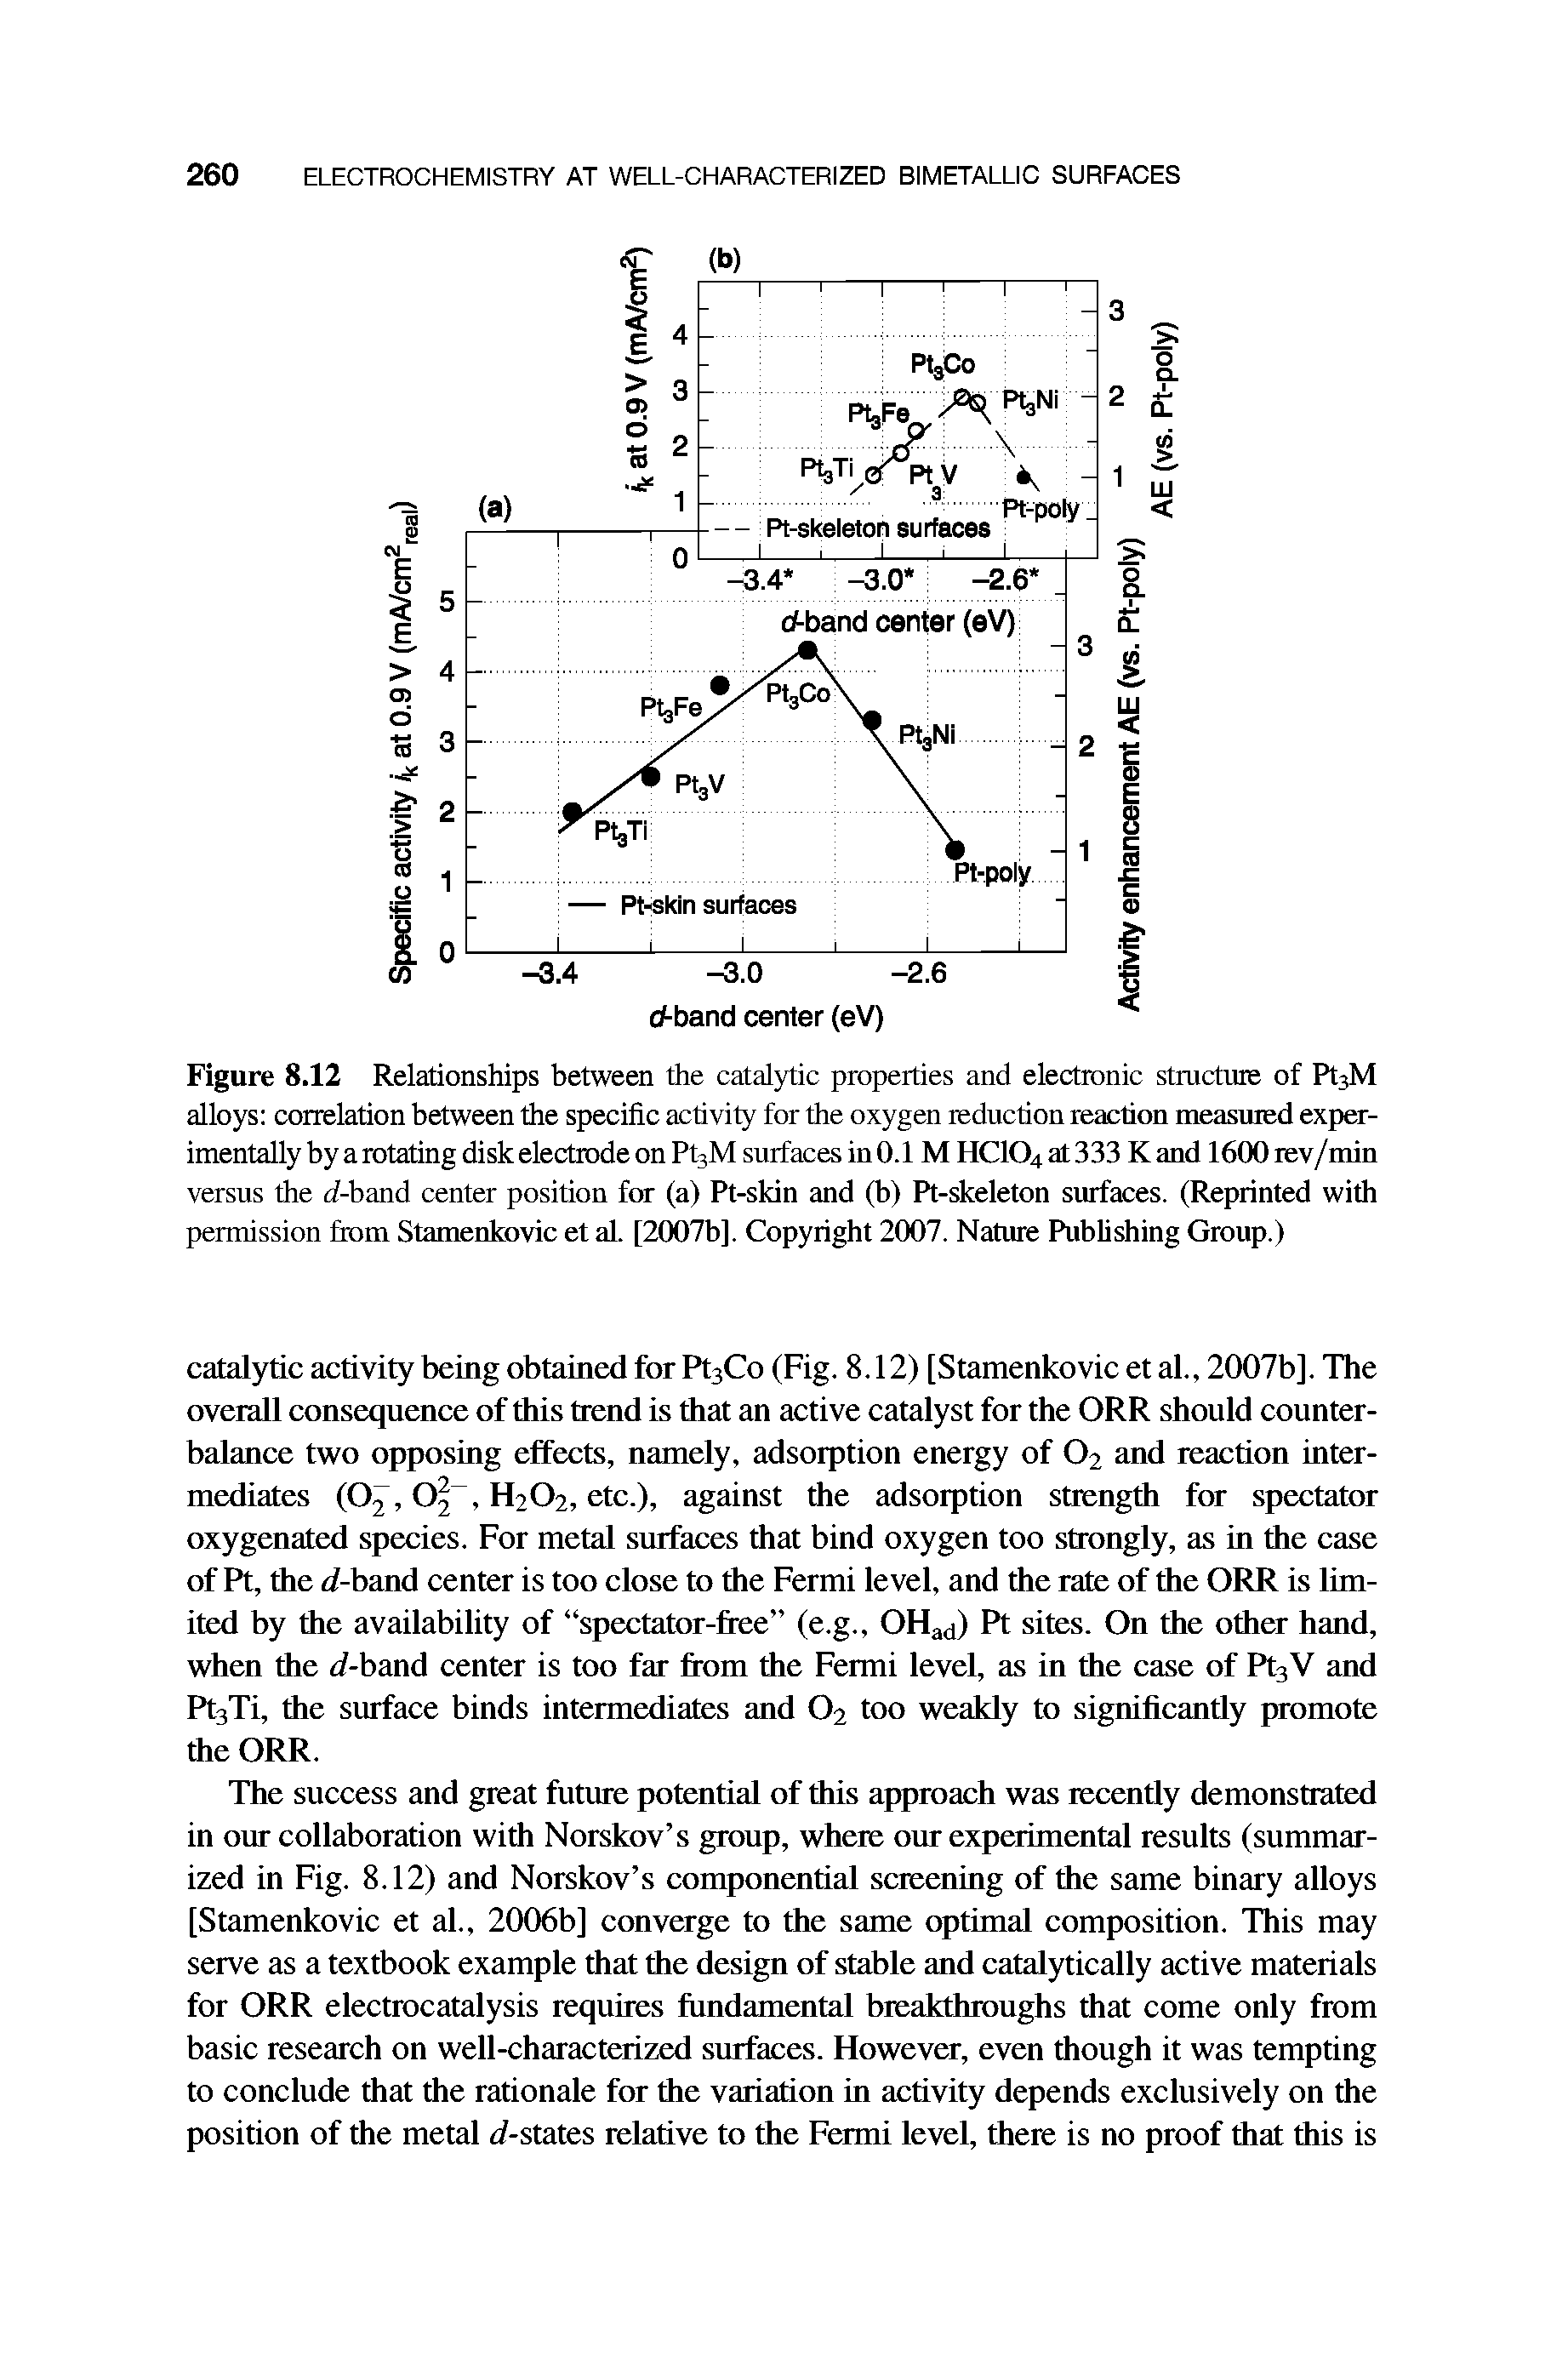 Figure 8.12 Relationships between the catalytic properties and electronic structure of Pt3M alloys correlation between the specific activity for the oxygen reduction reaction measured experimentally by a rotating disk electrode on Pt3M surfaces in 0.1 M HCIO4 at 333 K and 1600 lev/min versus the li-band center position for (a) Pt-skin and (b) Pt-skeleton surfaces. (Reprinted with permission from Stamenkovic et al. [2007b]. Copyright 2007. Nature Pubhshing Group.)...